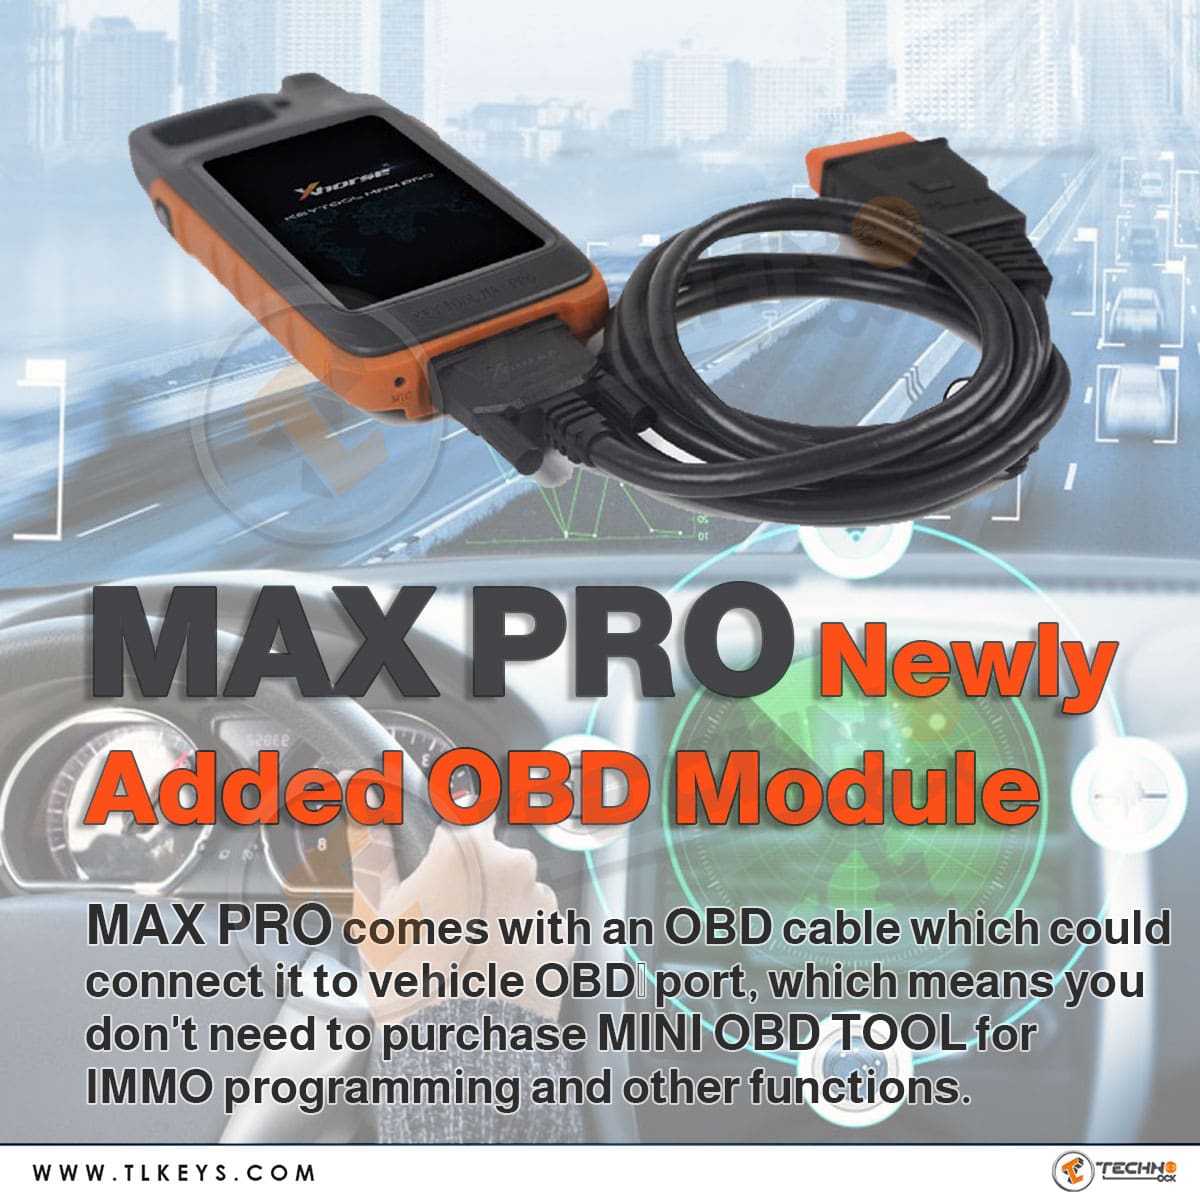  MAX PRO comes with an OBD cable that can plug into the vehicle's OBDⅡ port